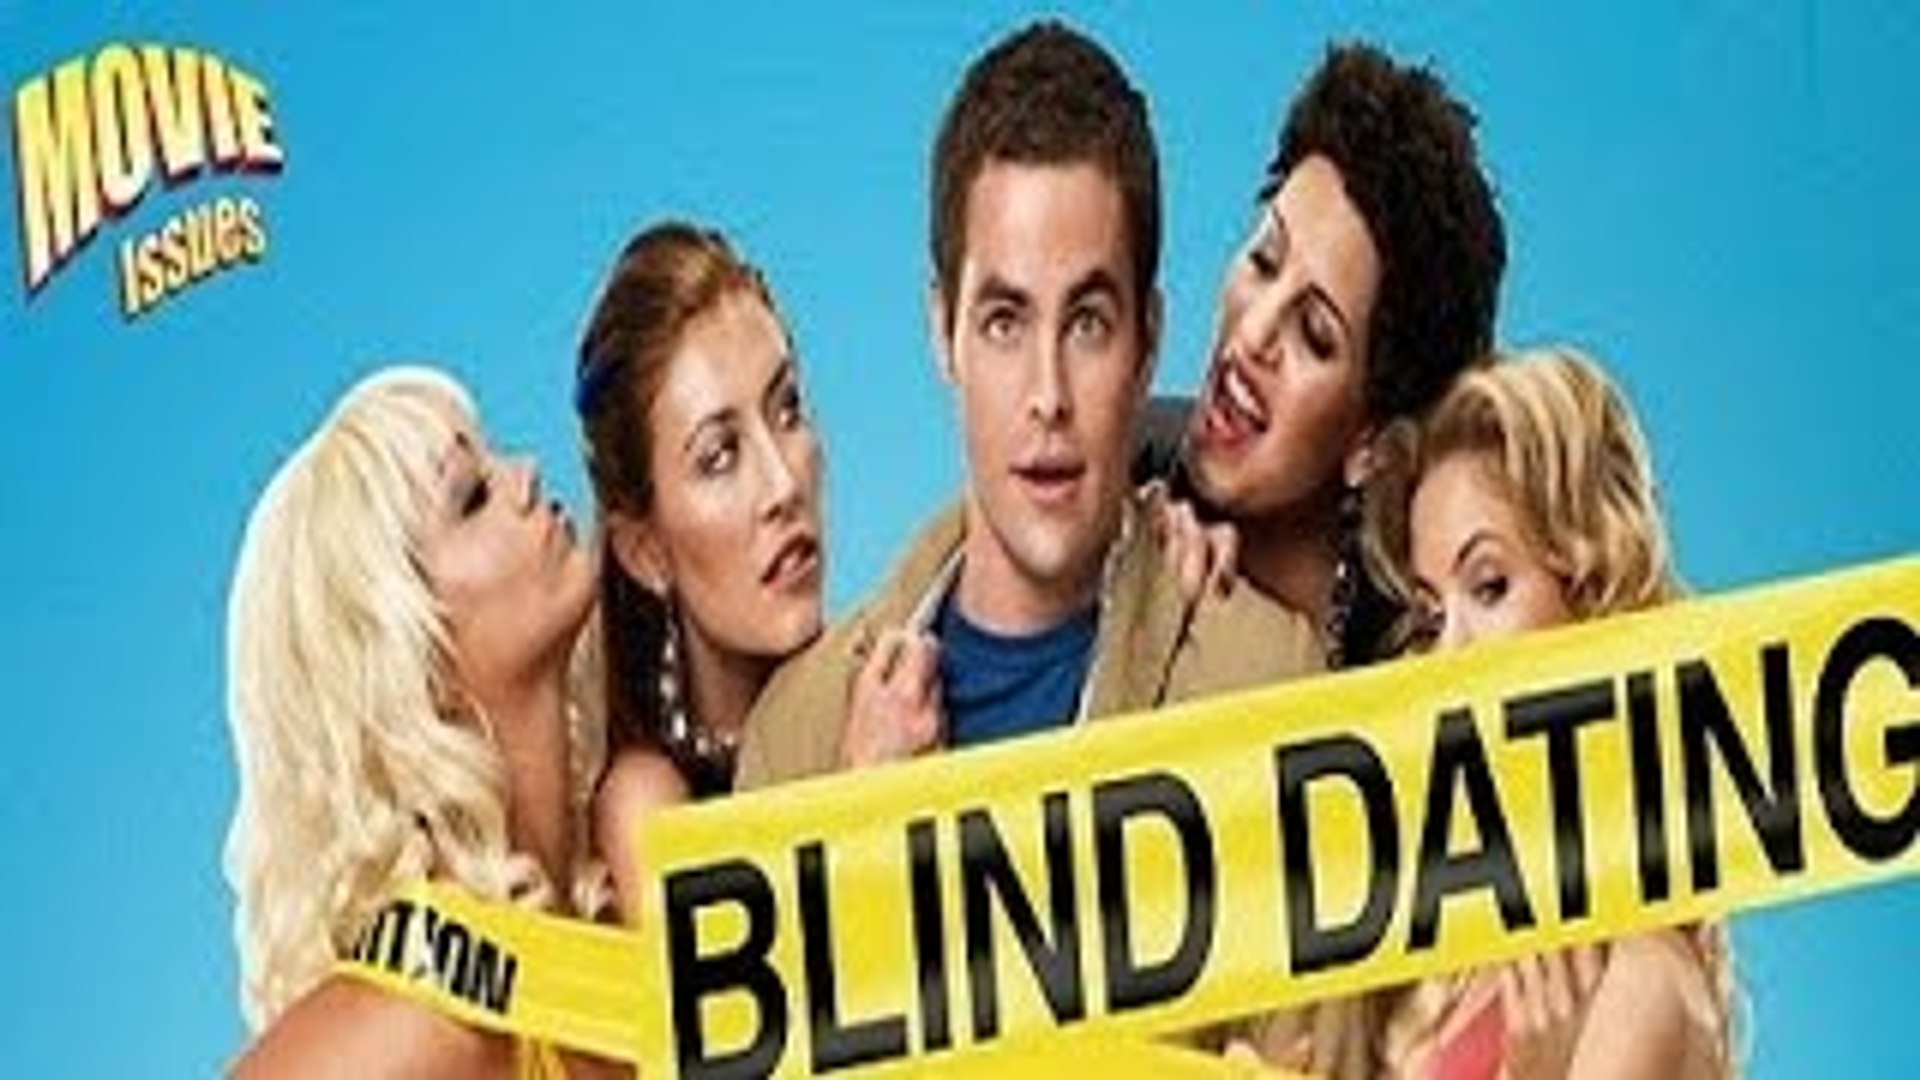 ⁣Blind Dating Comedy Movies 2016 English - Rating High Romance movies